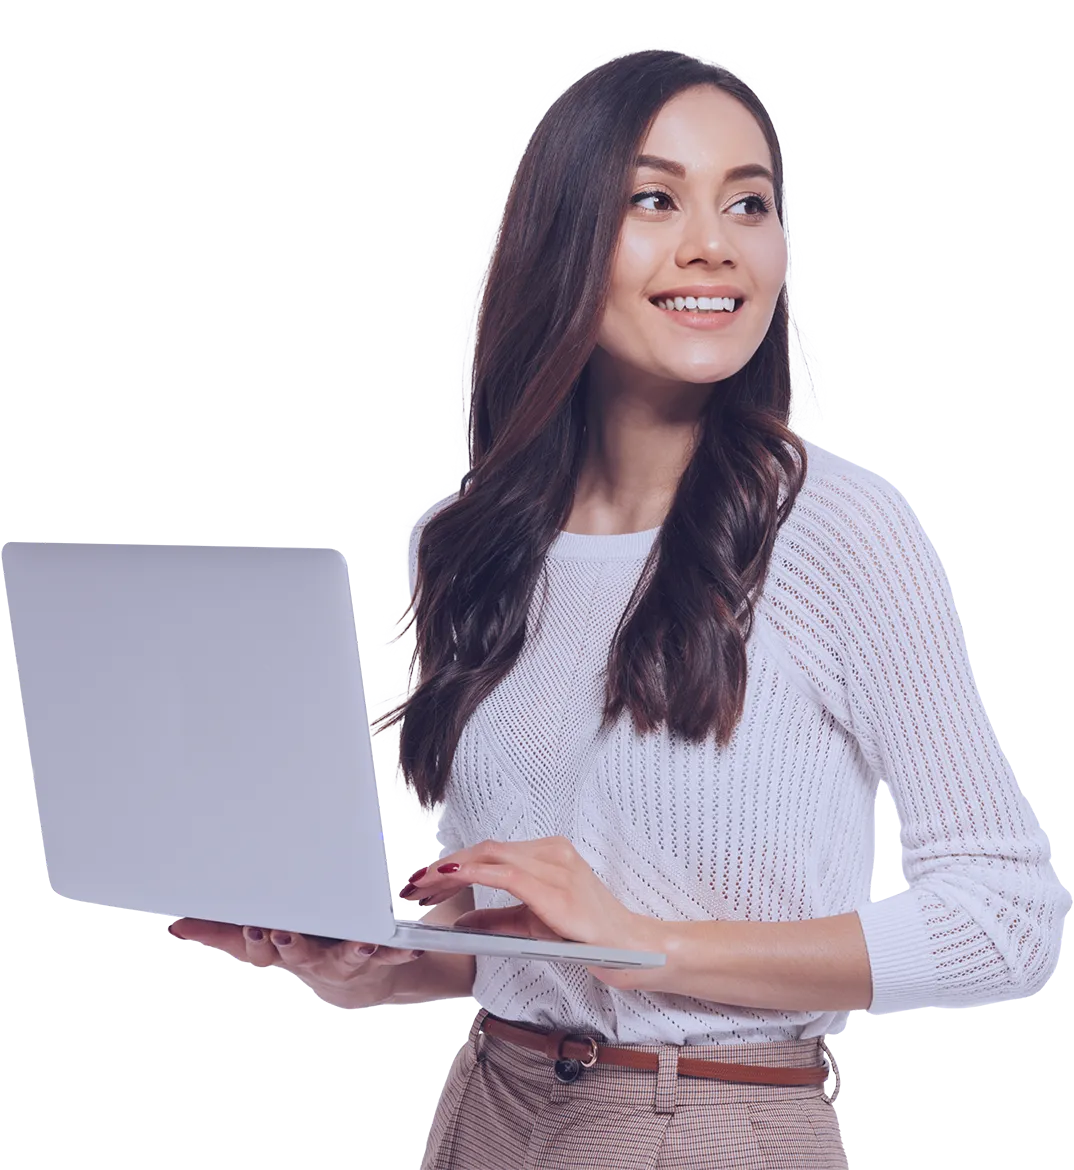 A portrait of woman standing with laptop